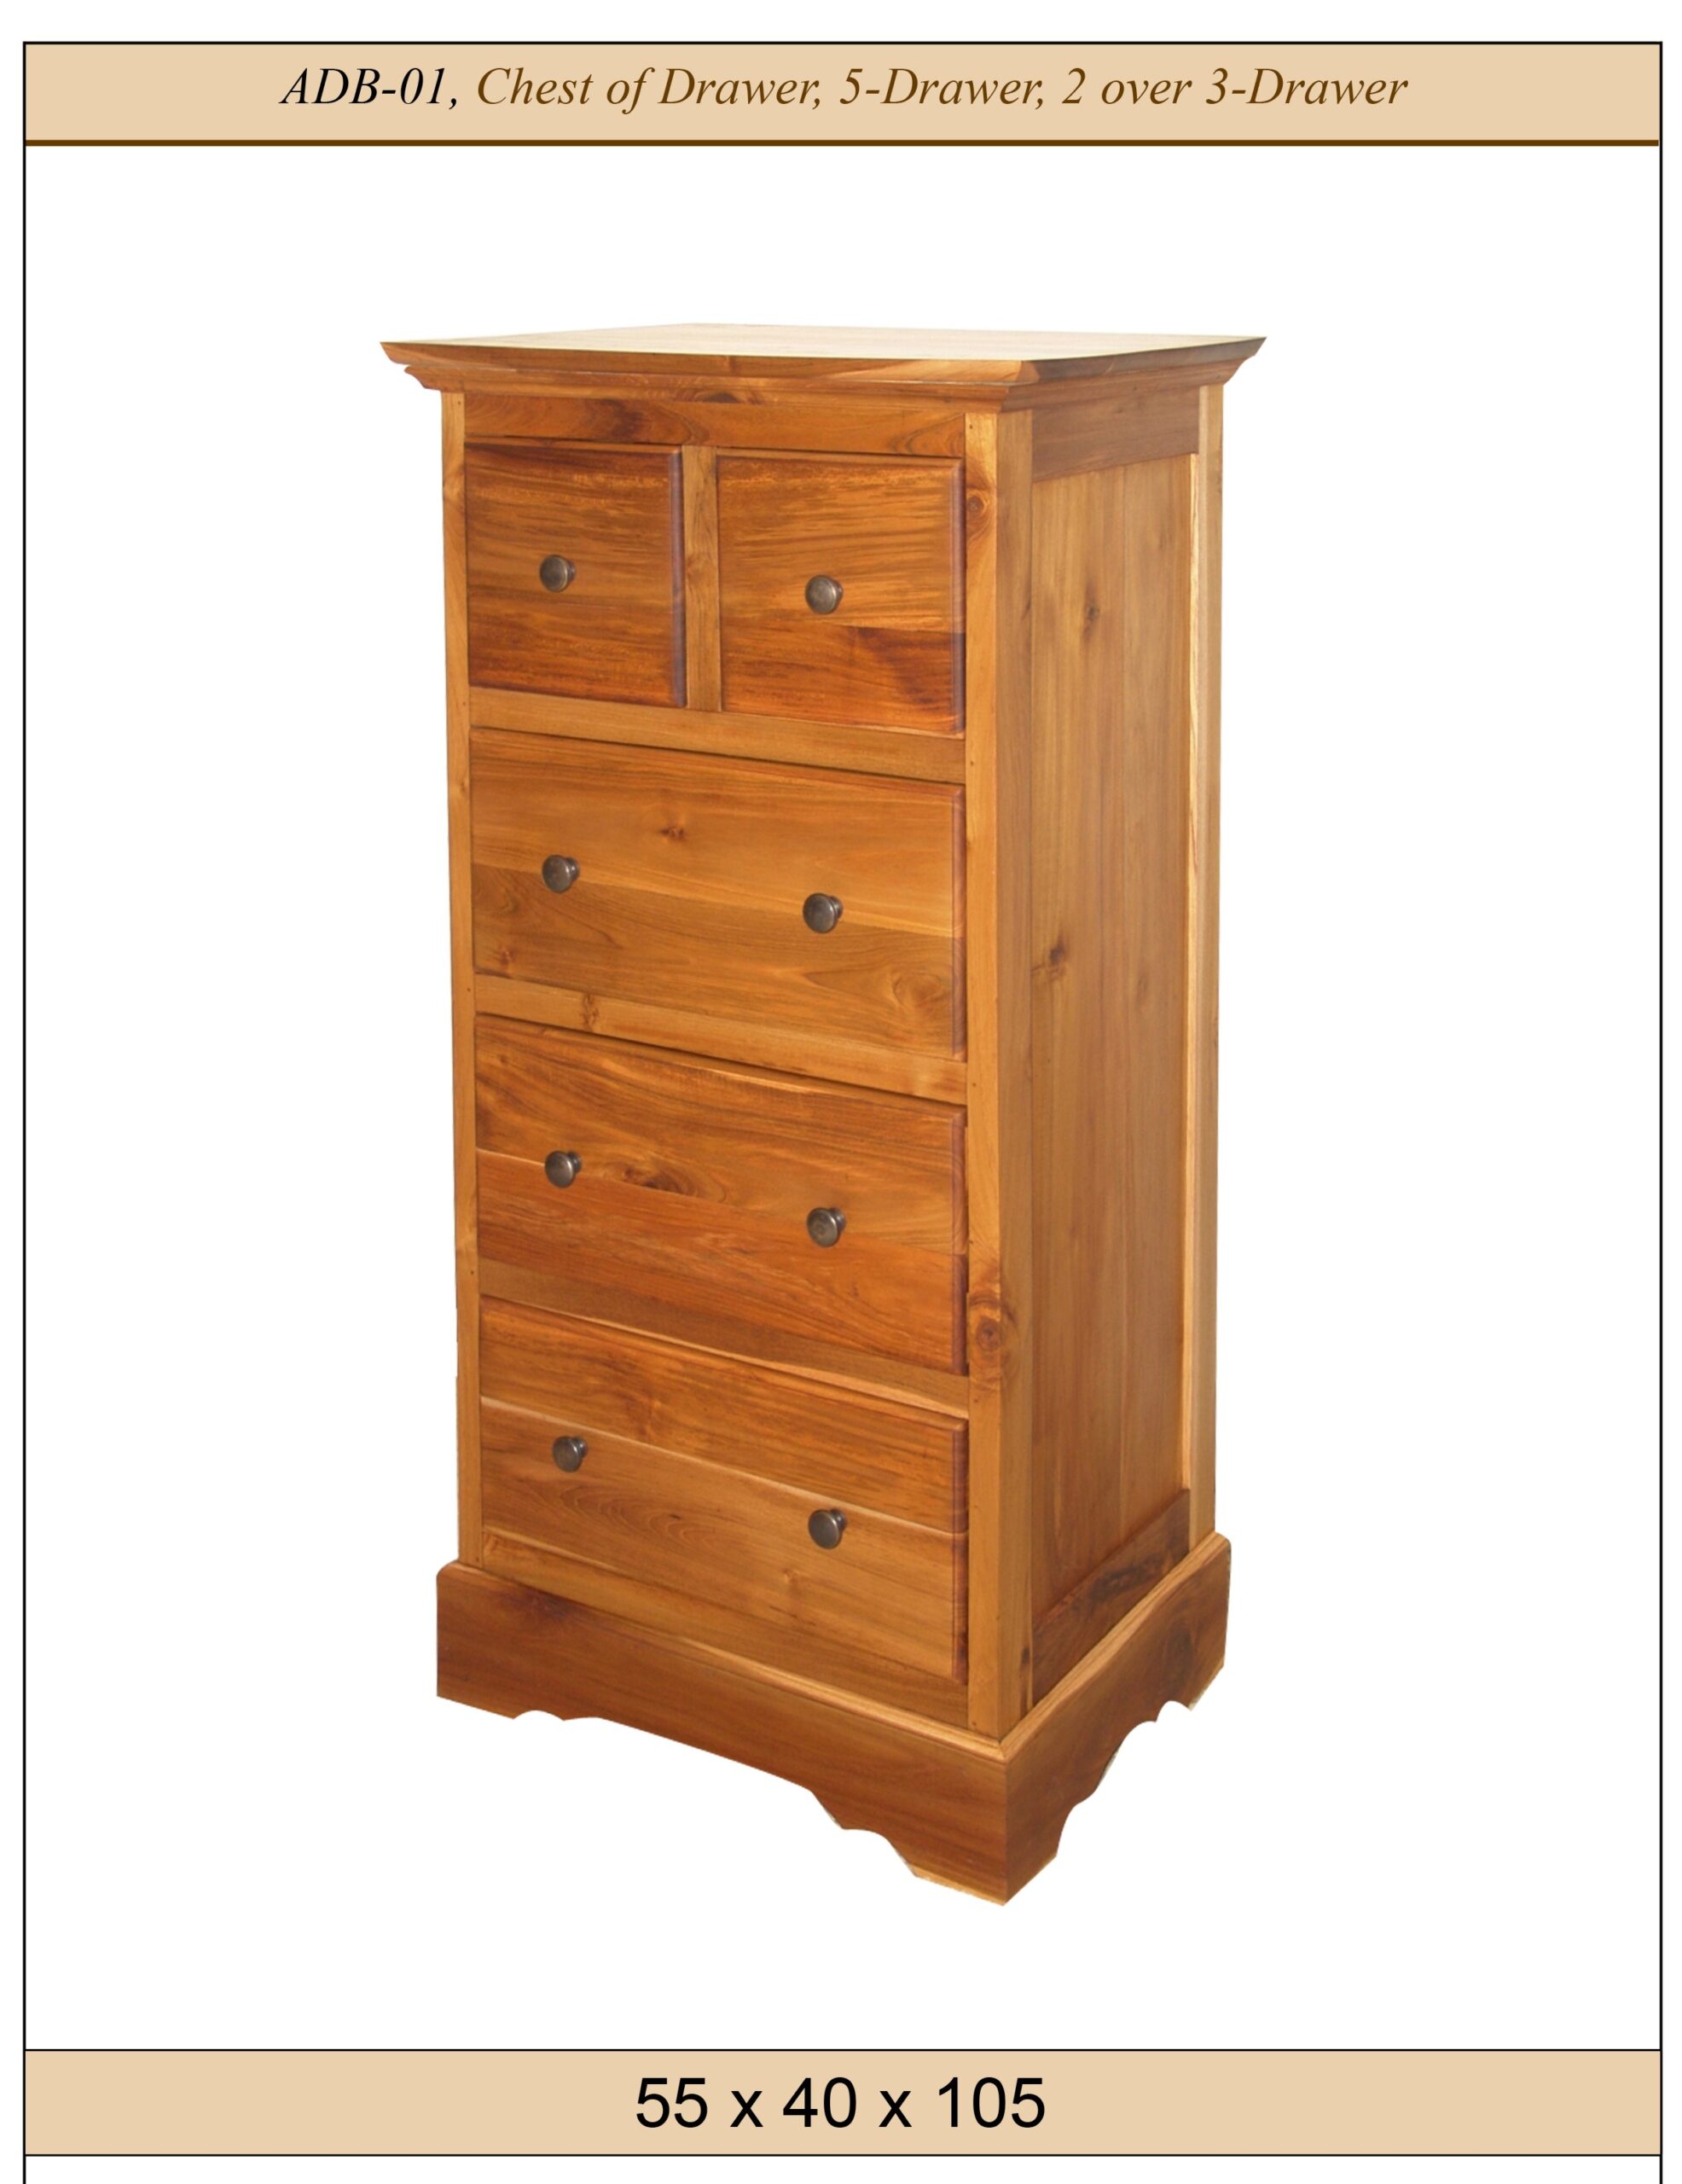  Chest of Drawers, 5 Drawer, 2 over 3 Drawer